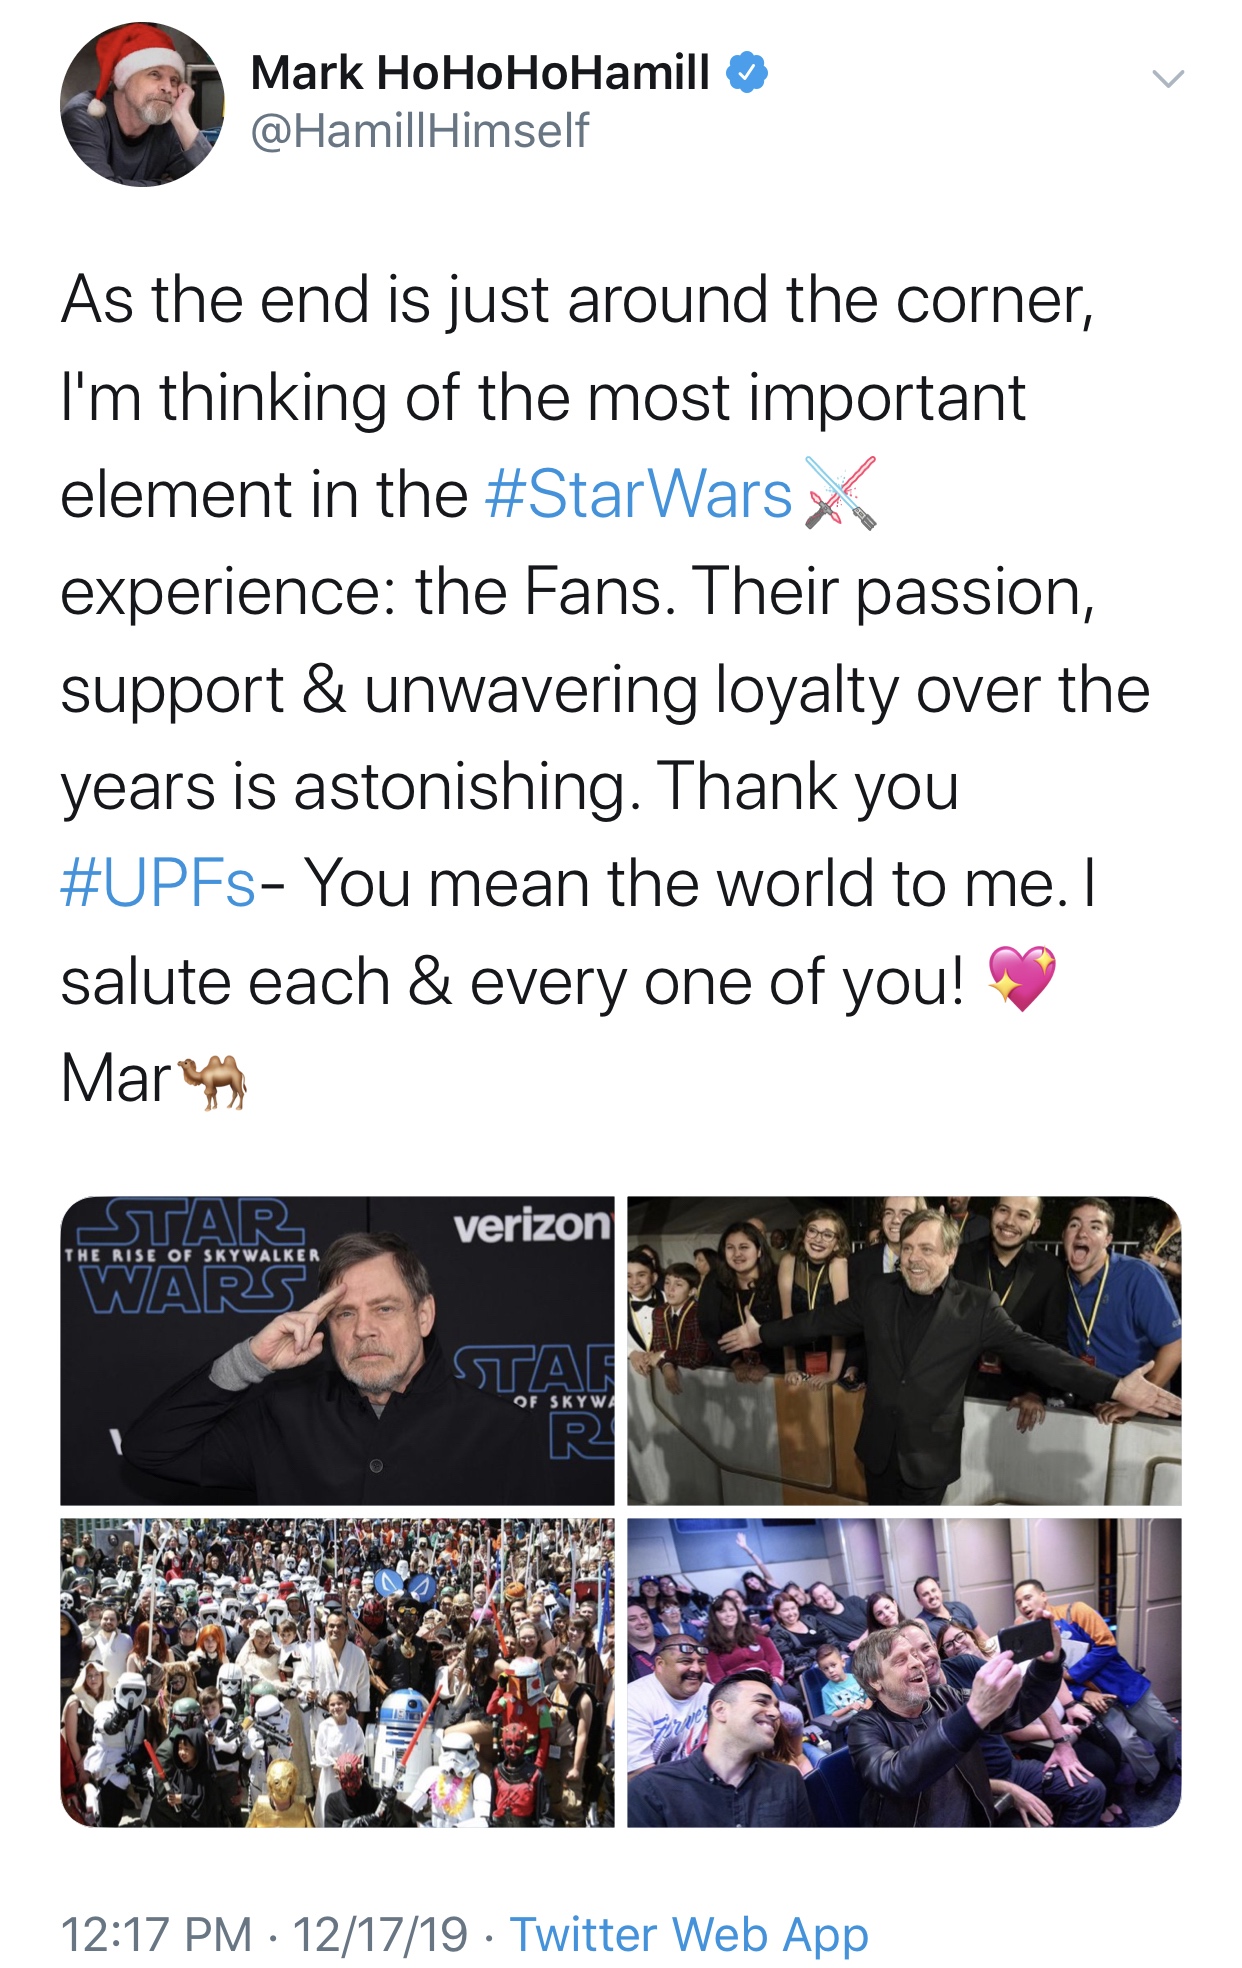 media - Mark HoHoHoHamill Himself As the end is just around the corner, I'm thinking of the most important element in the Wars X experience the Fans. Their passion, support & unwavering loyalty over the years is astonishing. Thank you mean the world to me